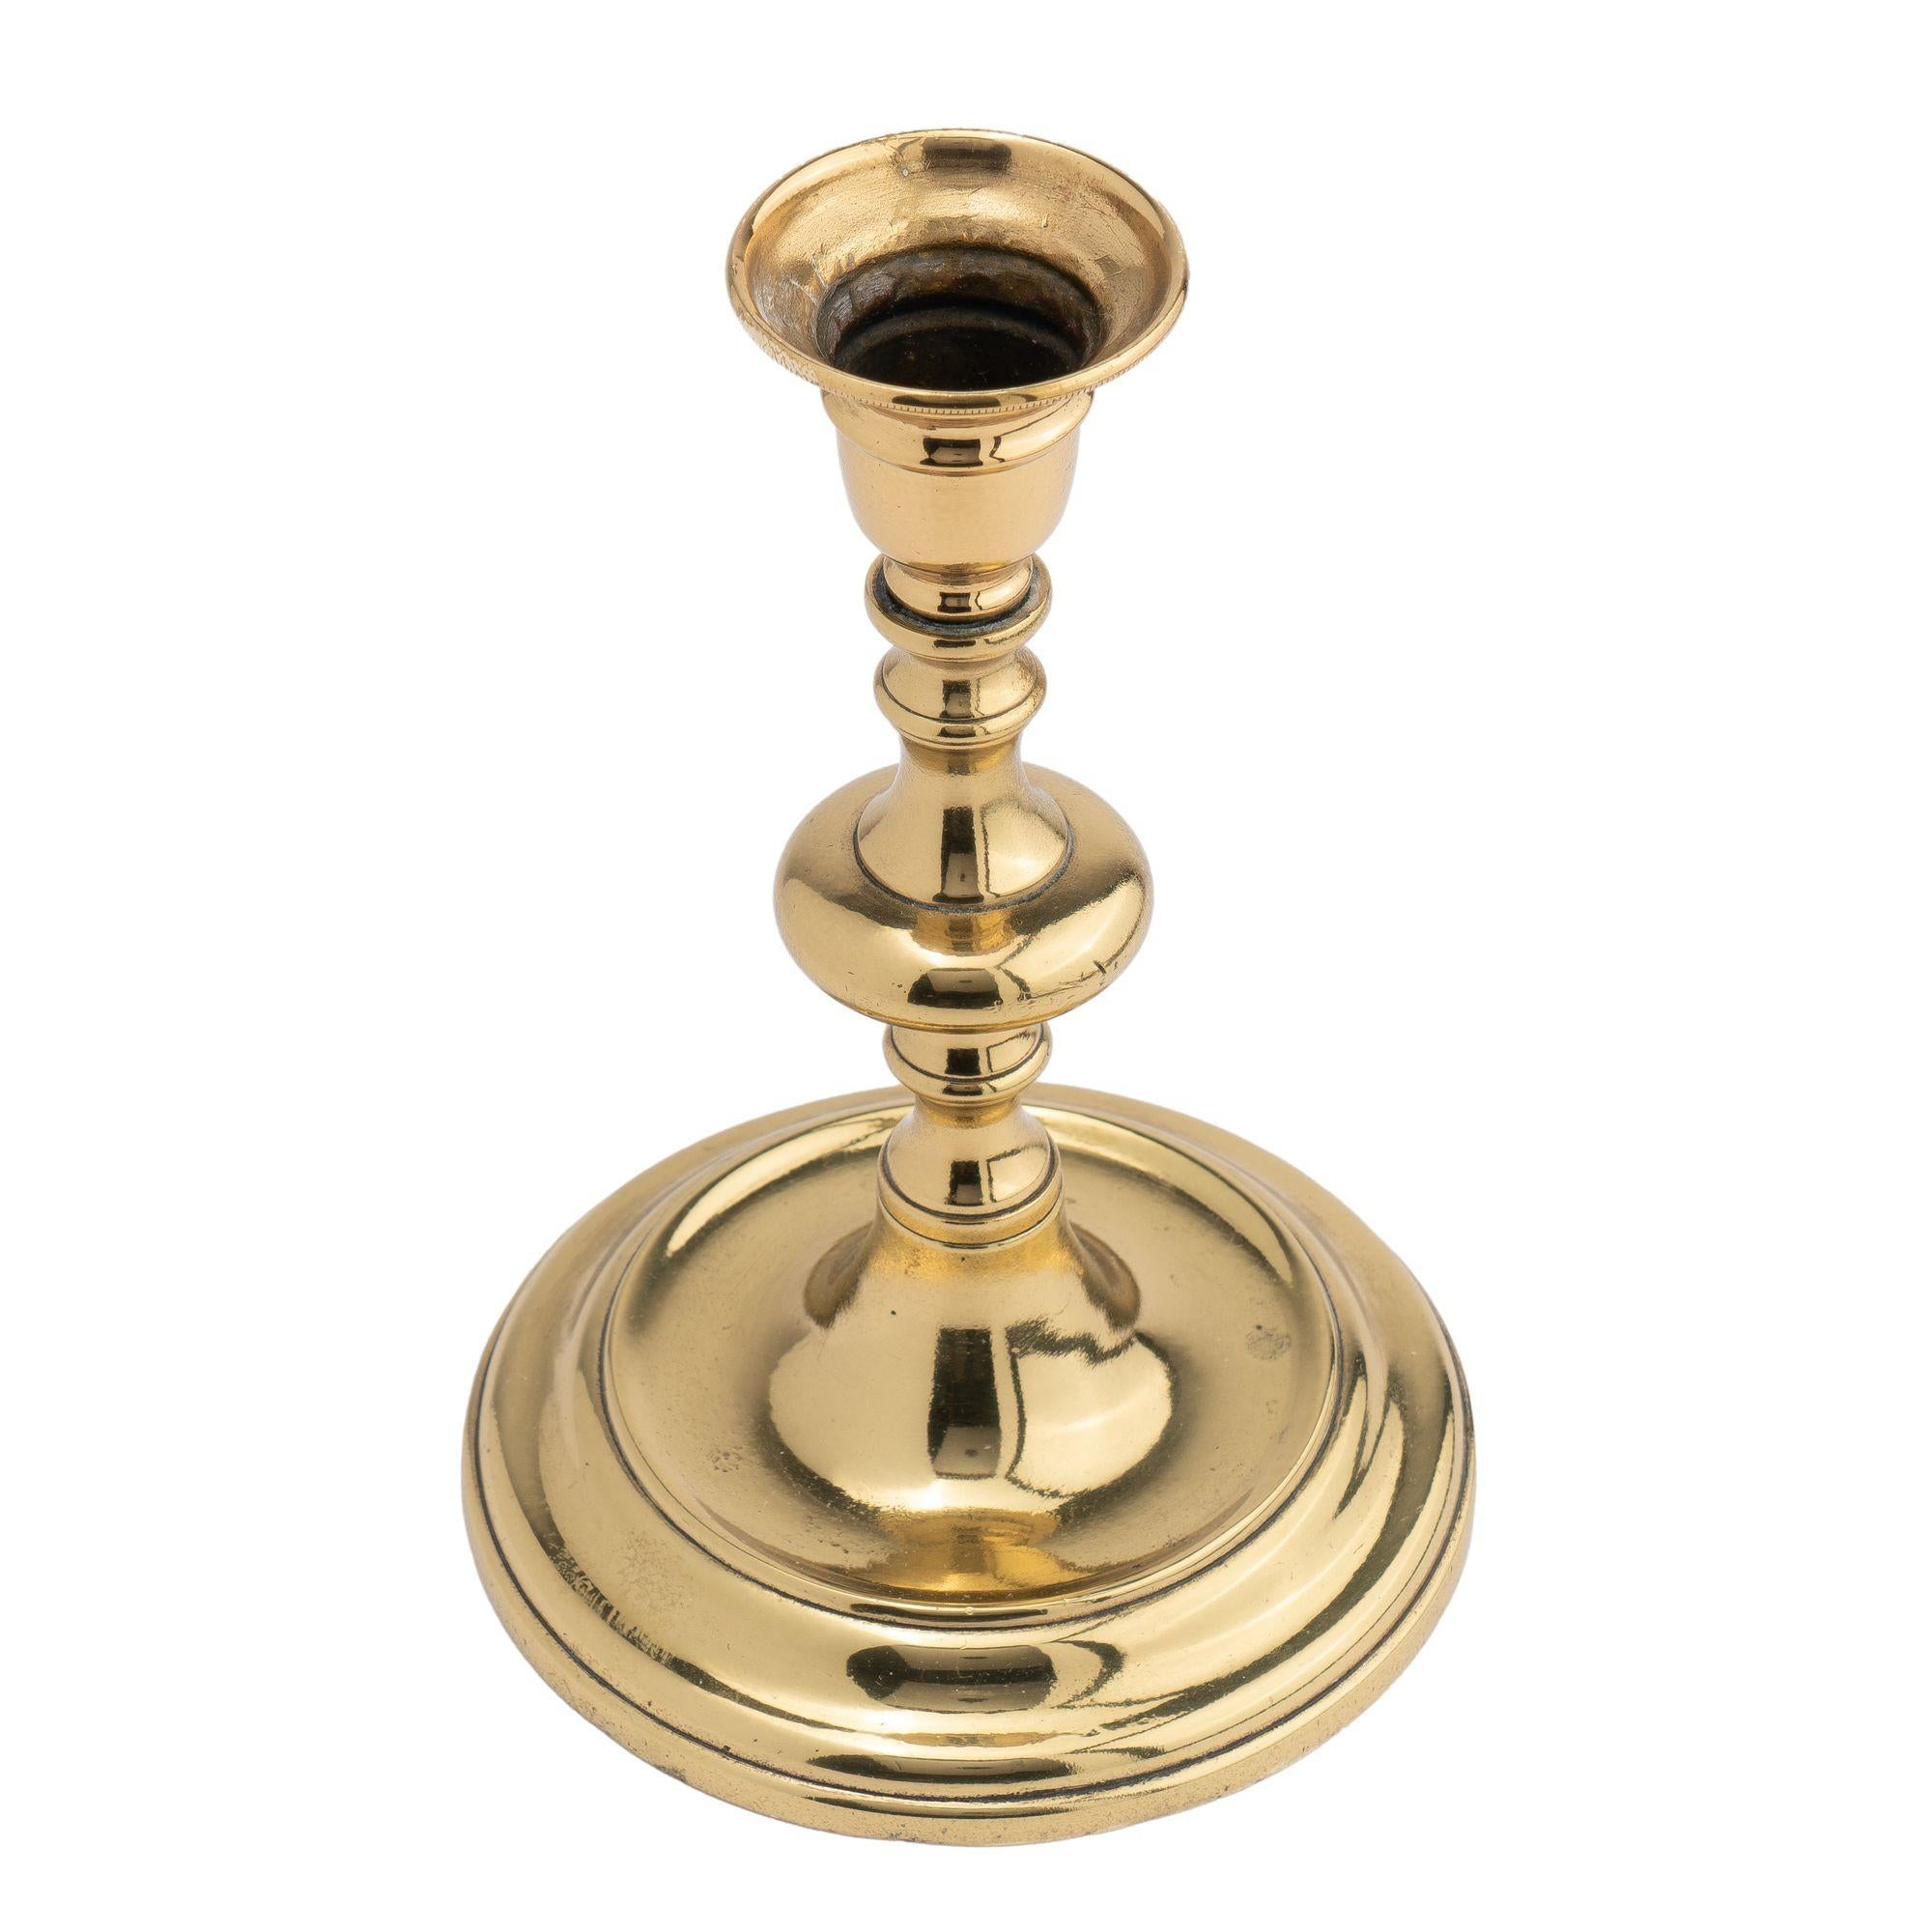 Cast brass candlestick with a circular base with drip pan on a stepped and domed base. The candlestick shaft is centered on a suppressed ball knob between similar waisted turnings. The shaft and base are joined by a hand threaded screw.
Continental,